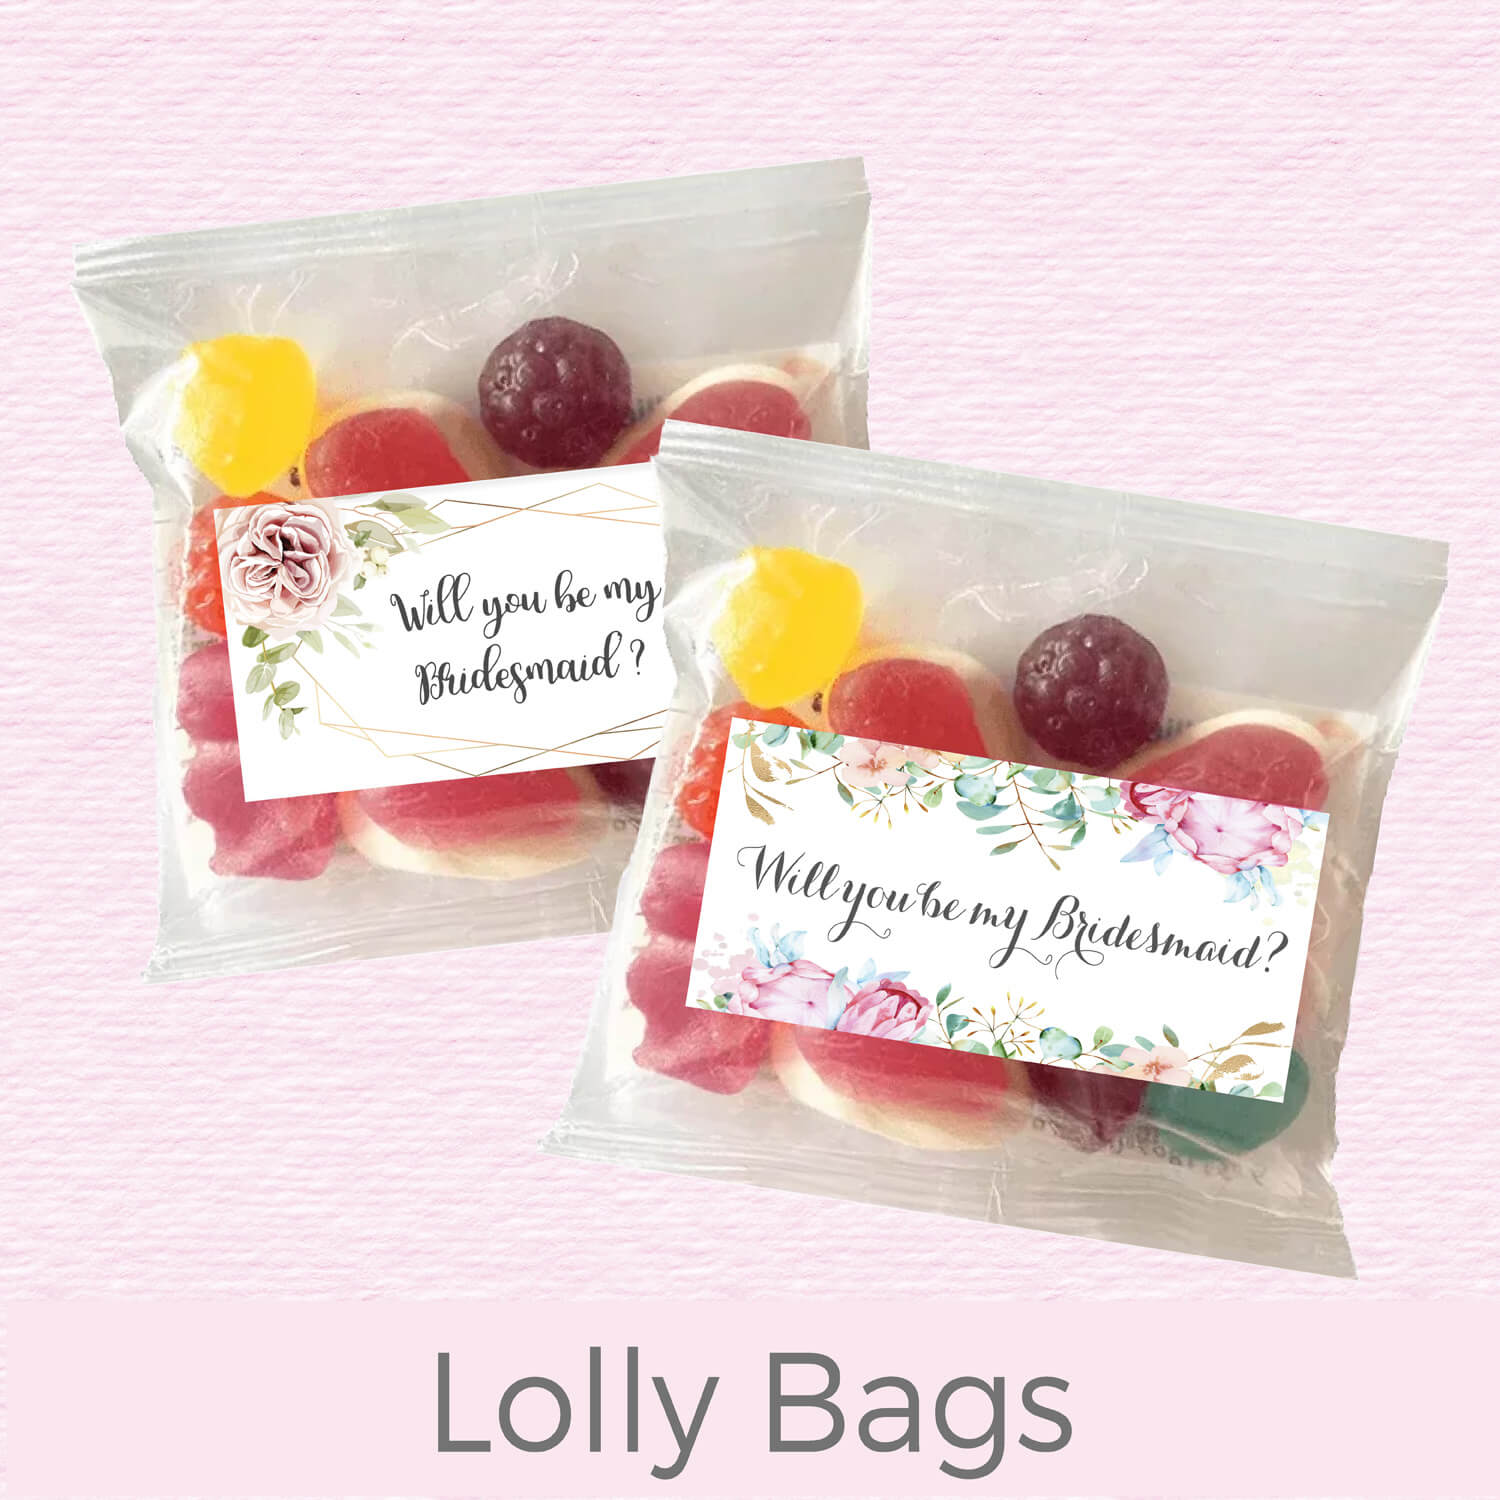 Be My Bridesmaid Lolly Bags